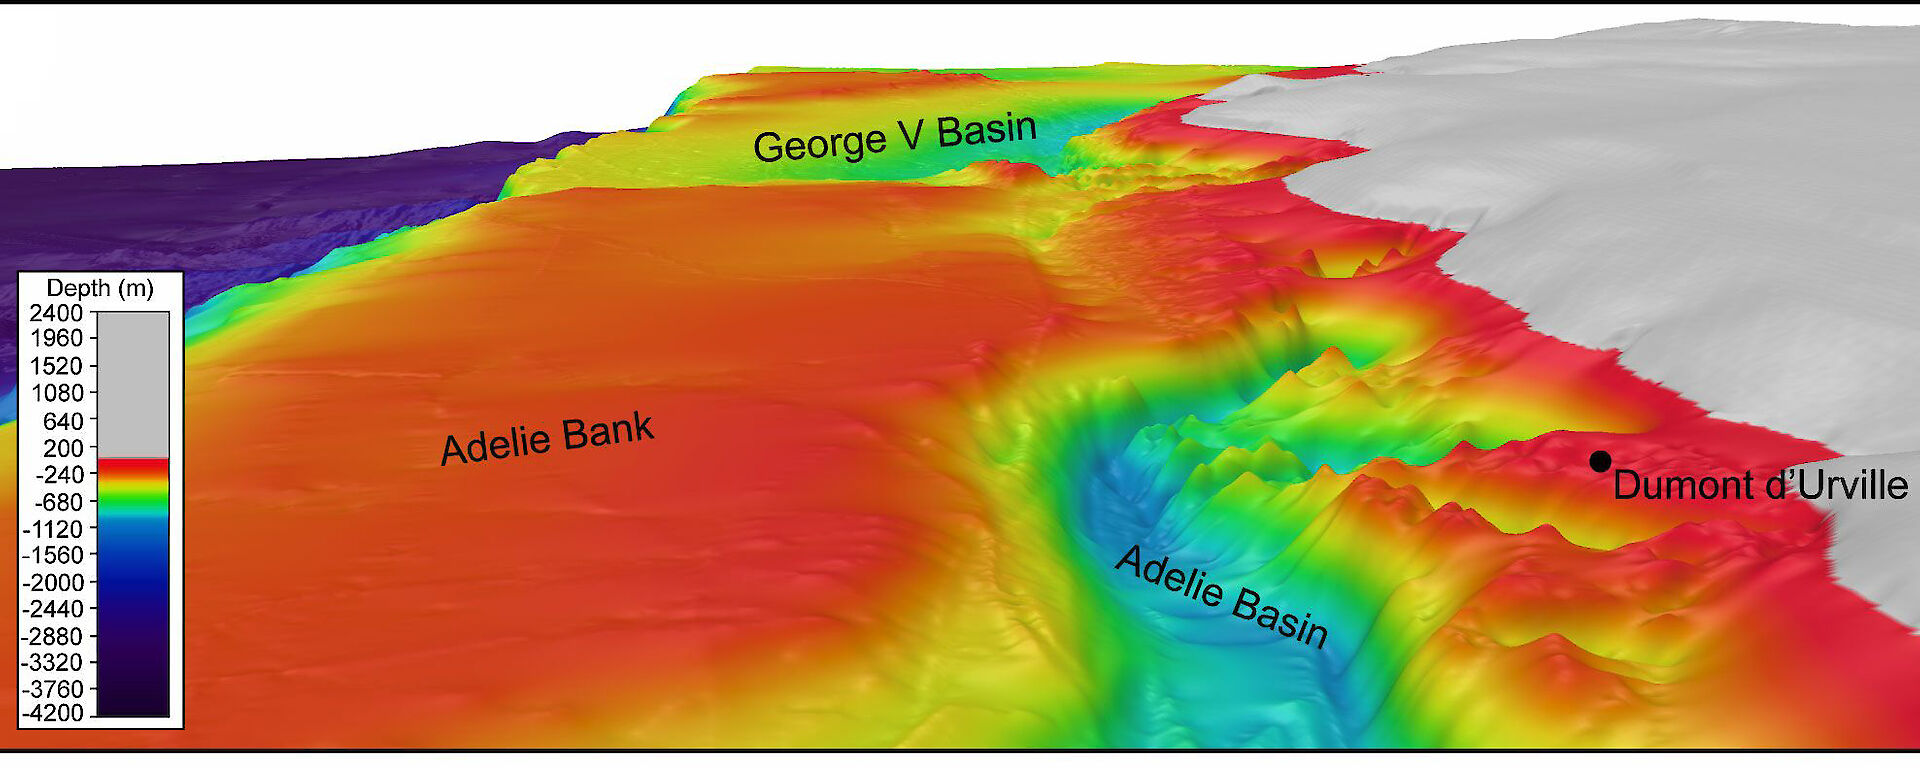 Oblique view across the George V Shelf through the deep Adélie Basin, across the rugged nearshore depressions and shallow Adélie Bank. The Adélie Basin is one of the deep basins carved out by ice streams during previous glaciations.